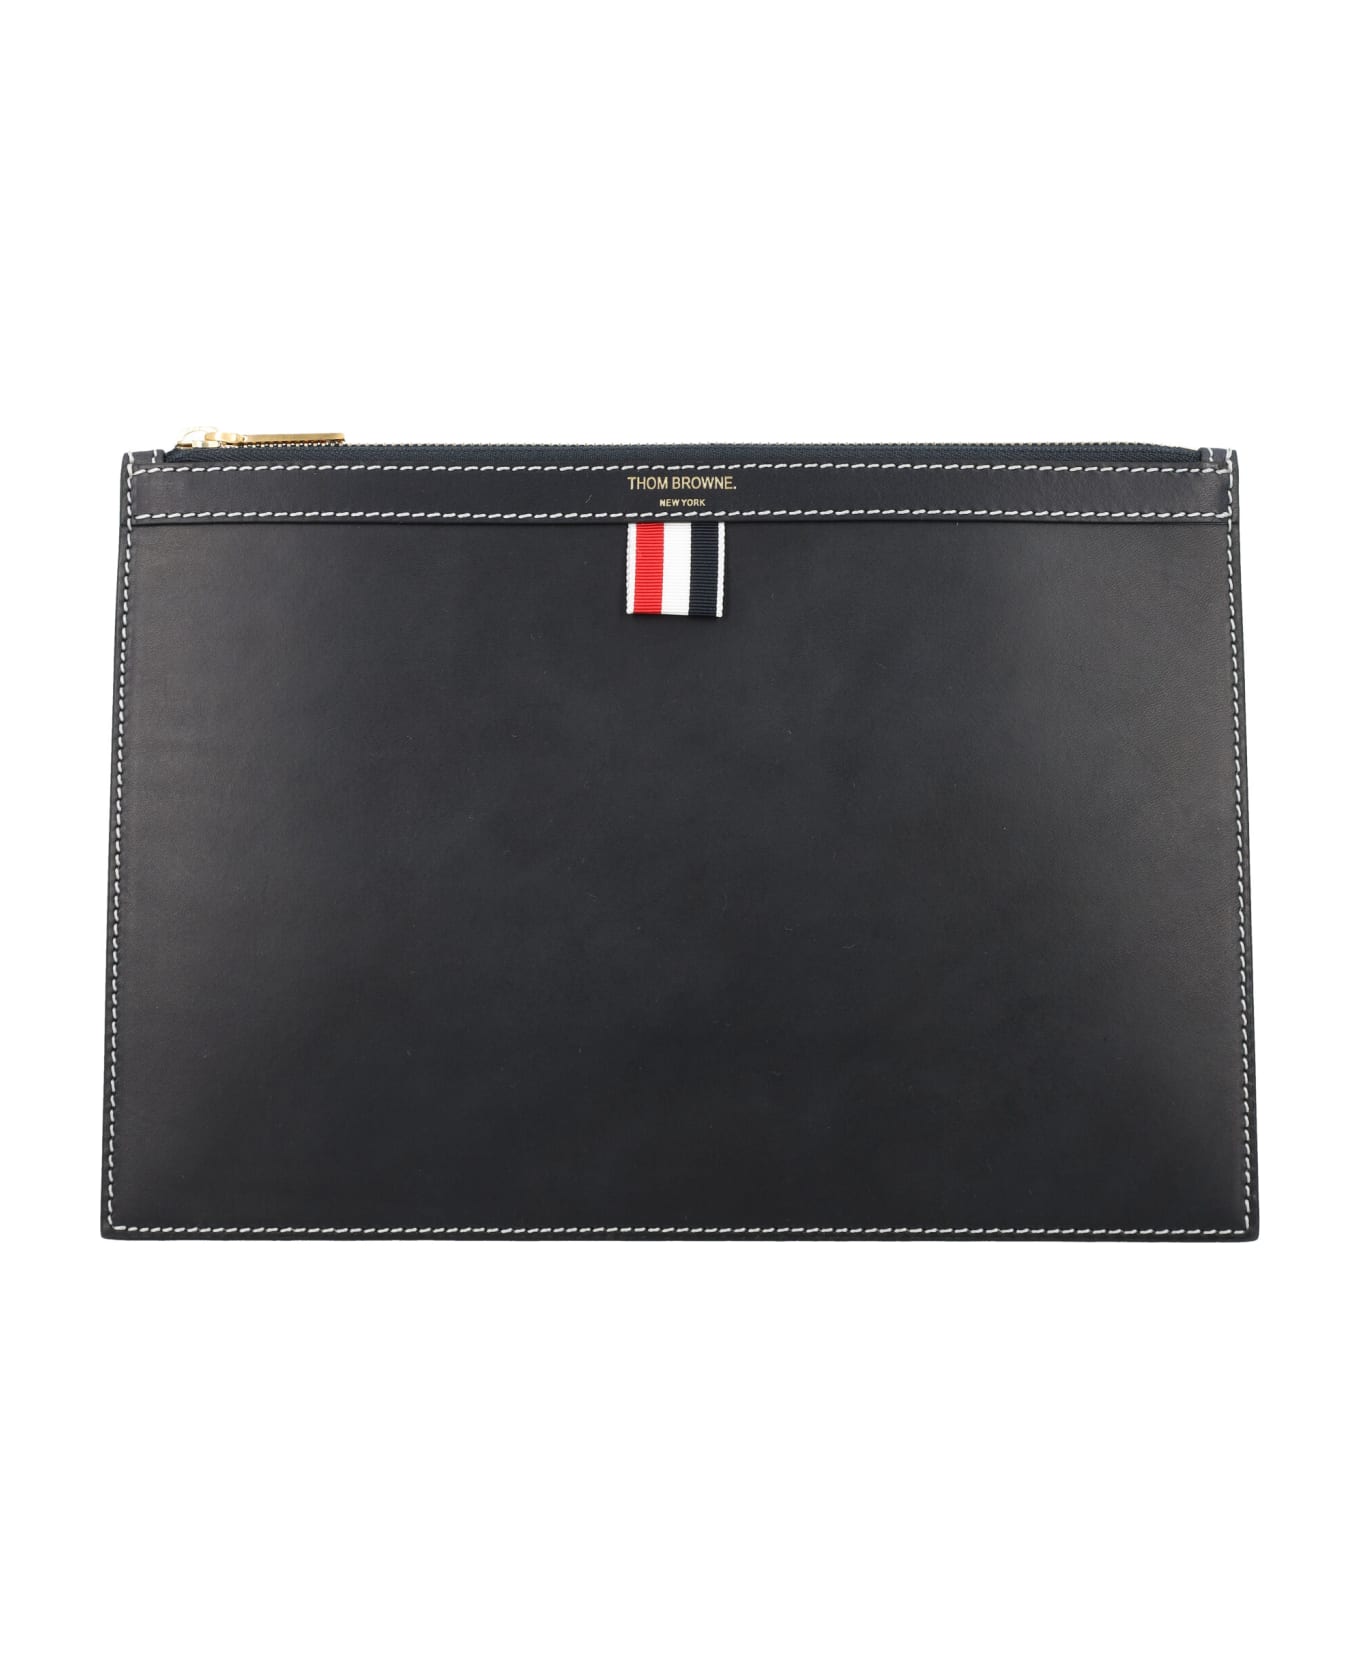 Thom Browne Document Holder Small - NAVY 財布